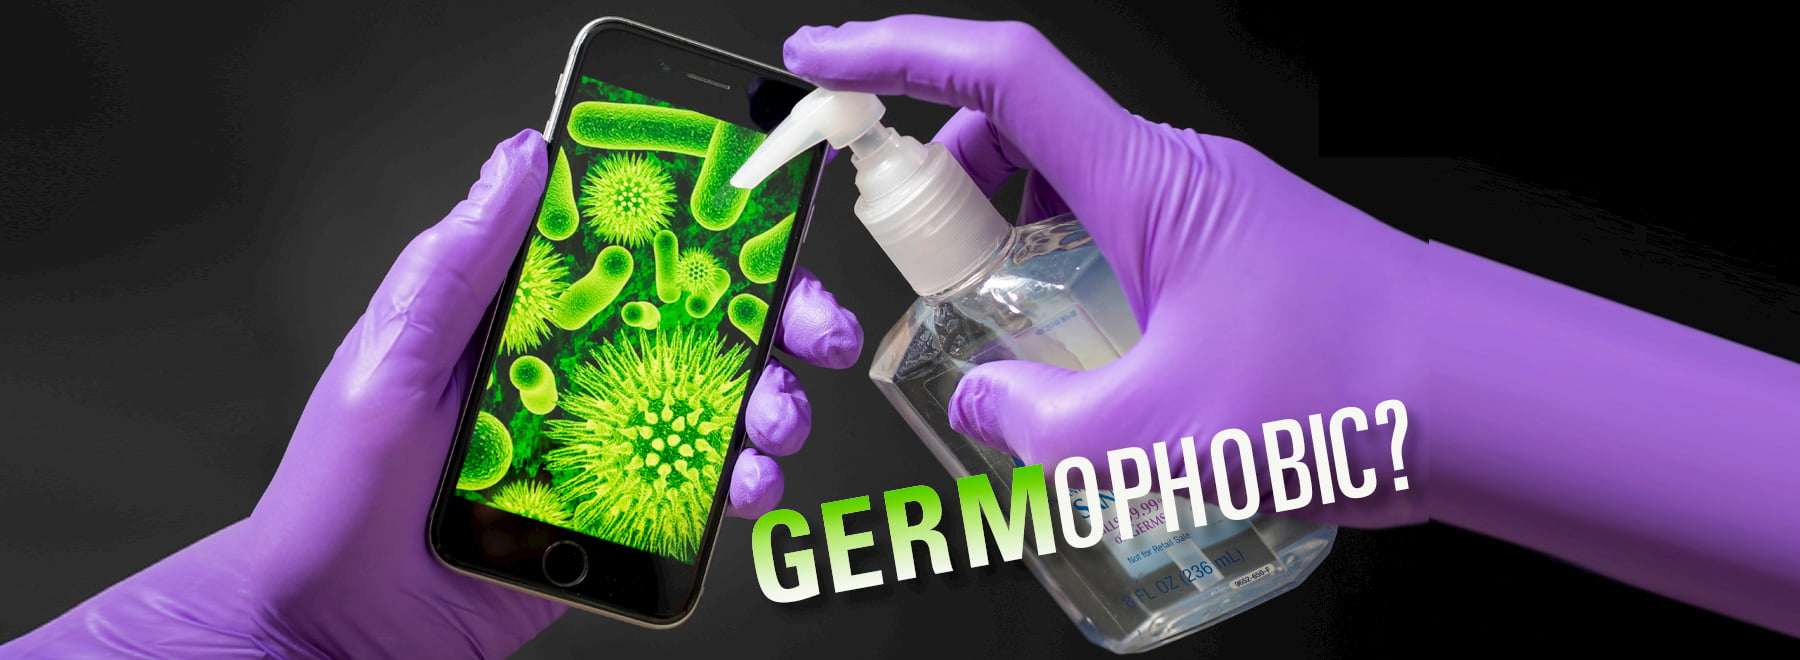 Hands in gloves putting sanitizer on a phone.